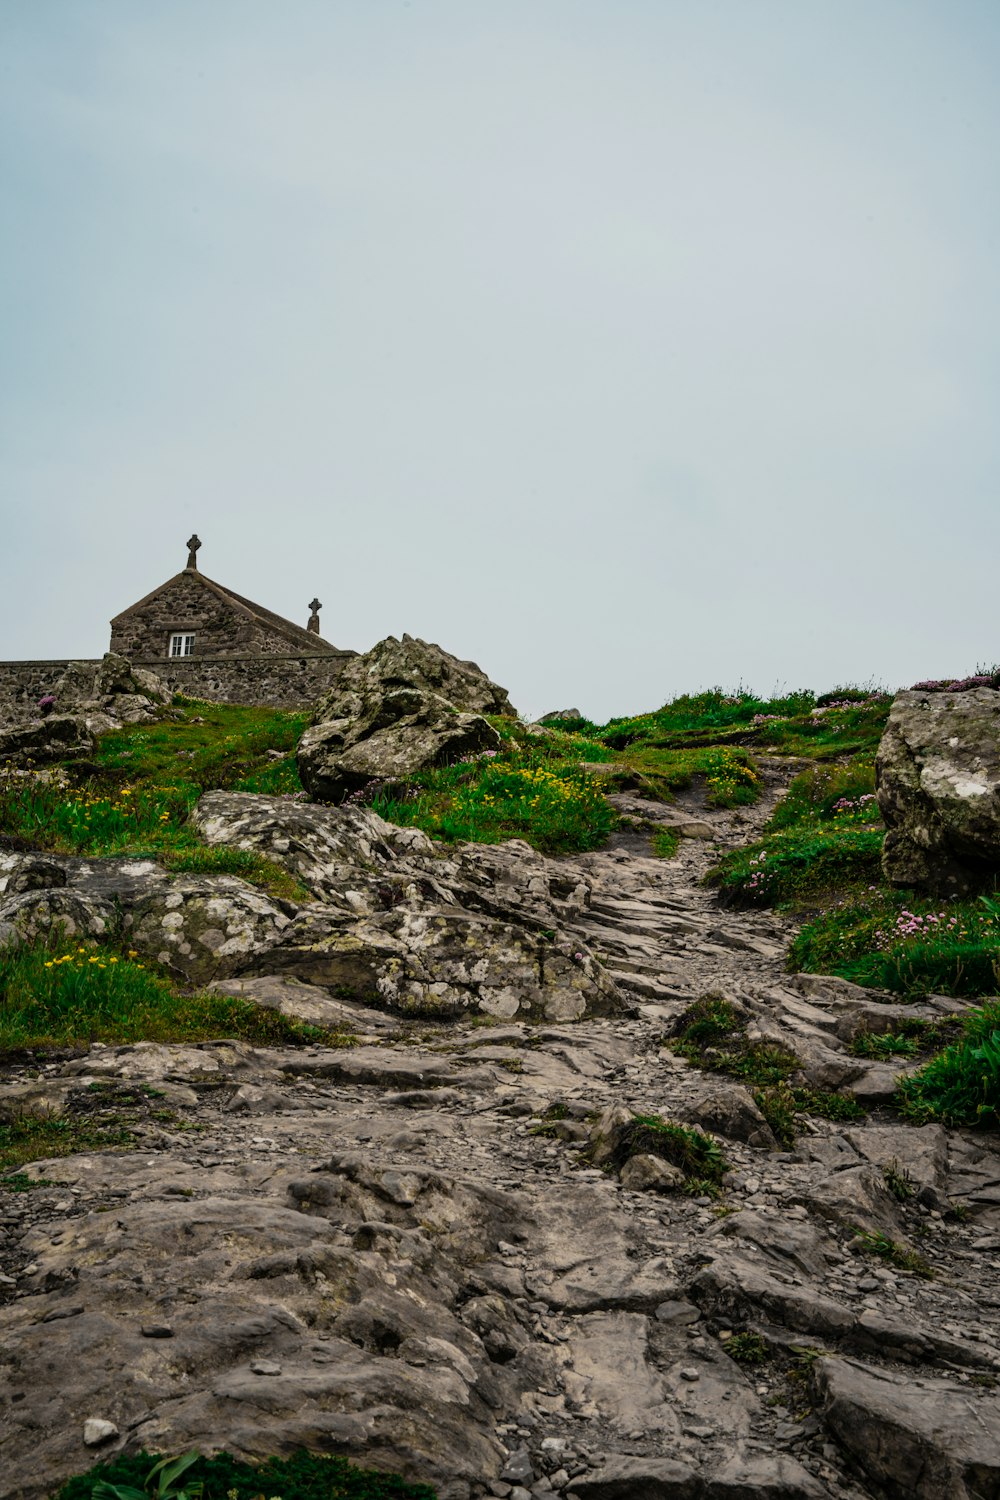 a small building on top of a rocky hill